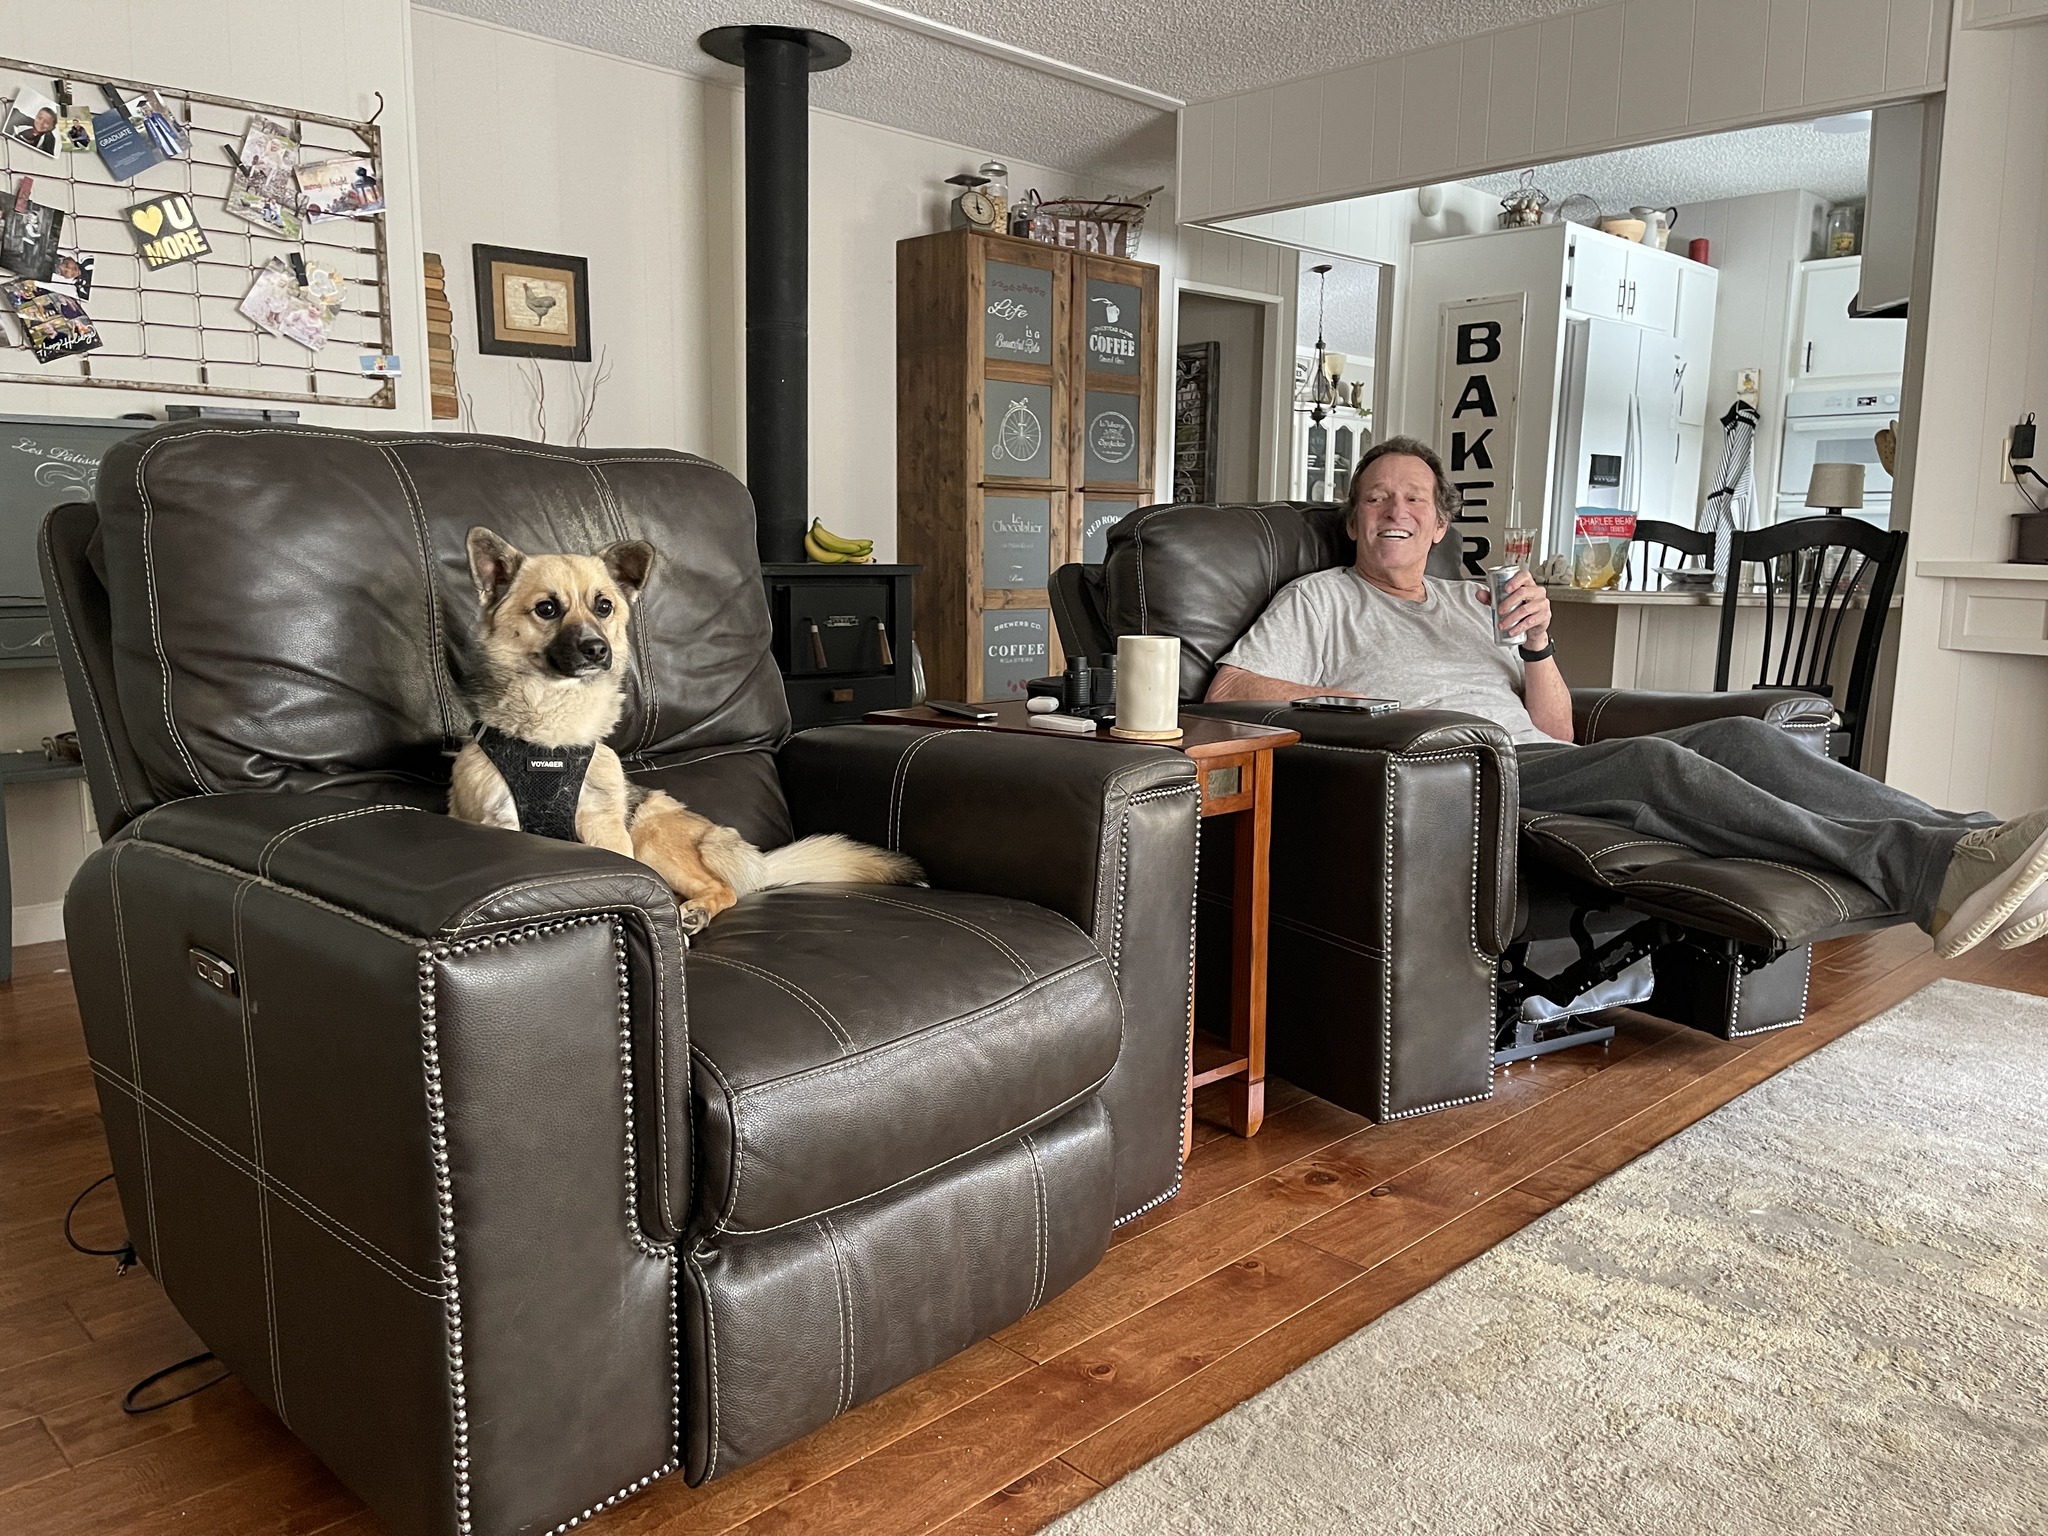 A man sits in a recliner with his dog.